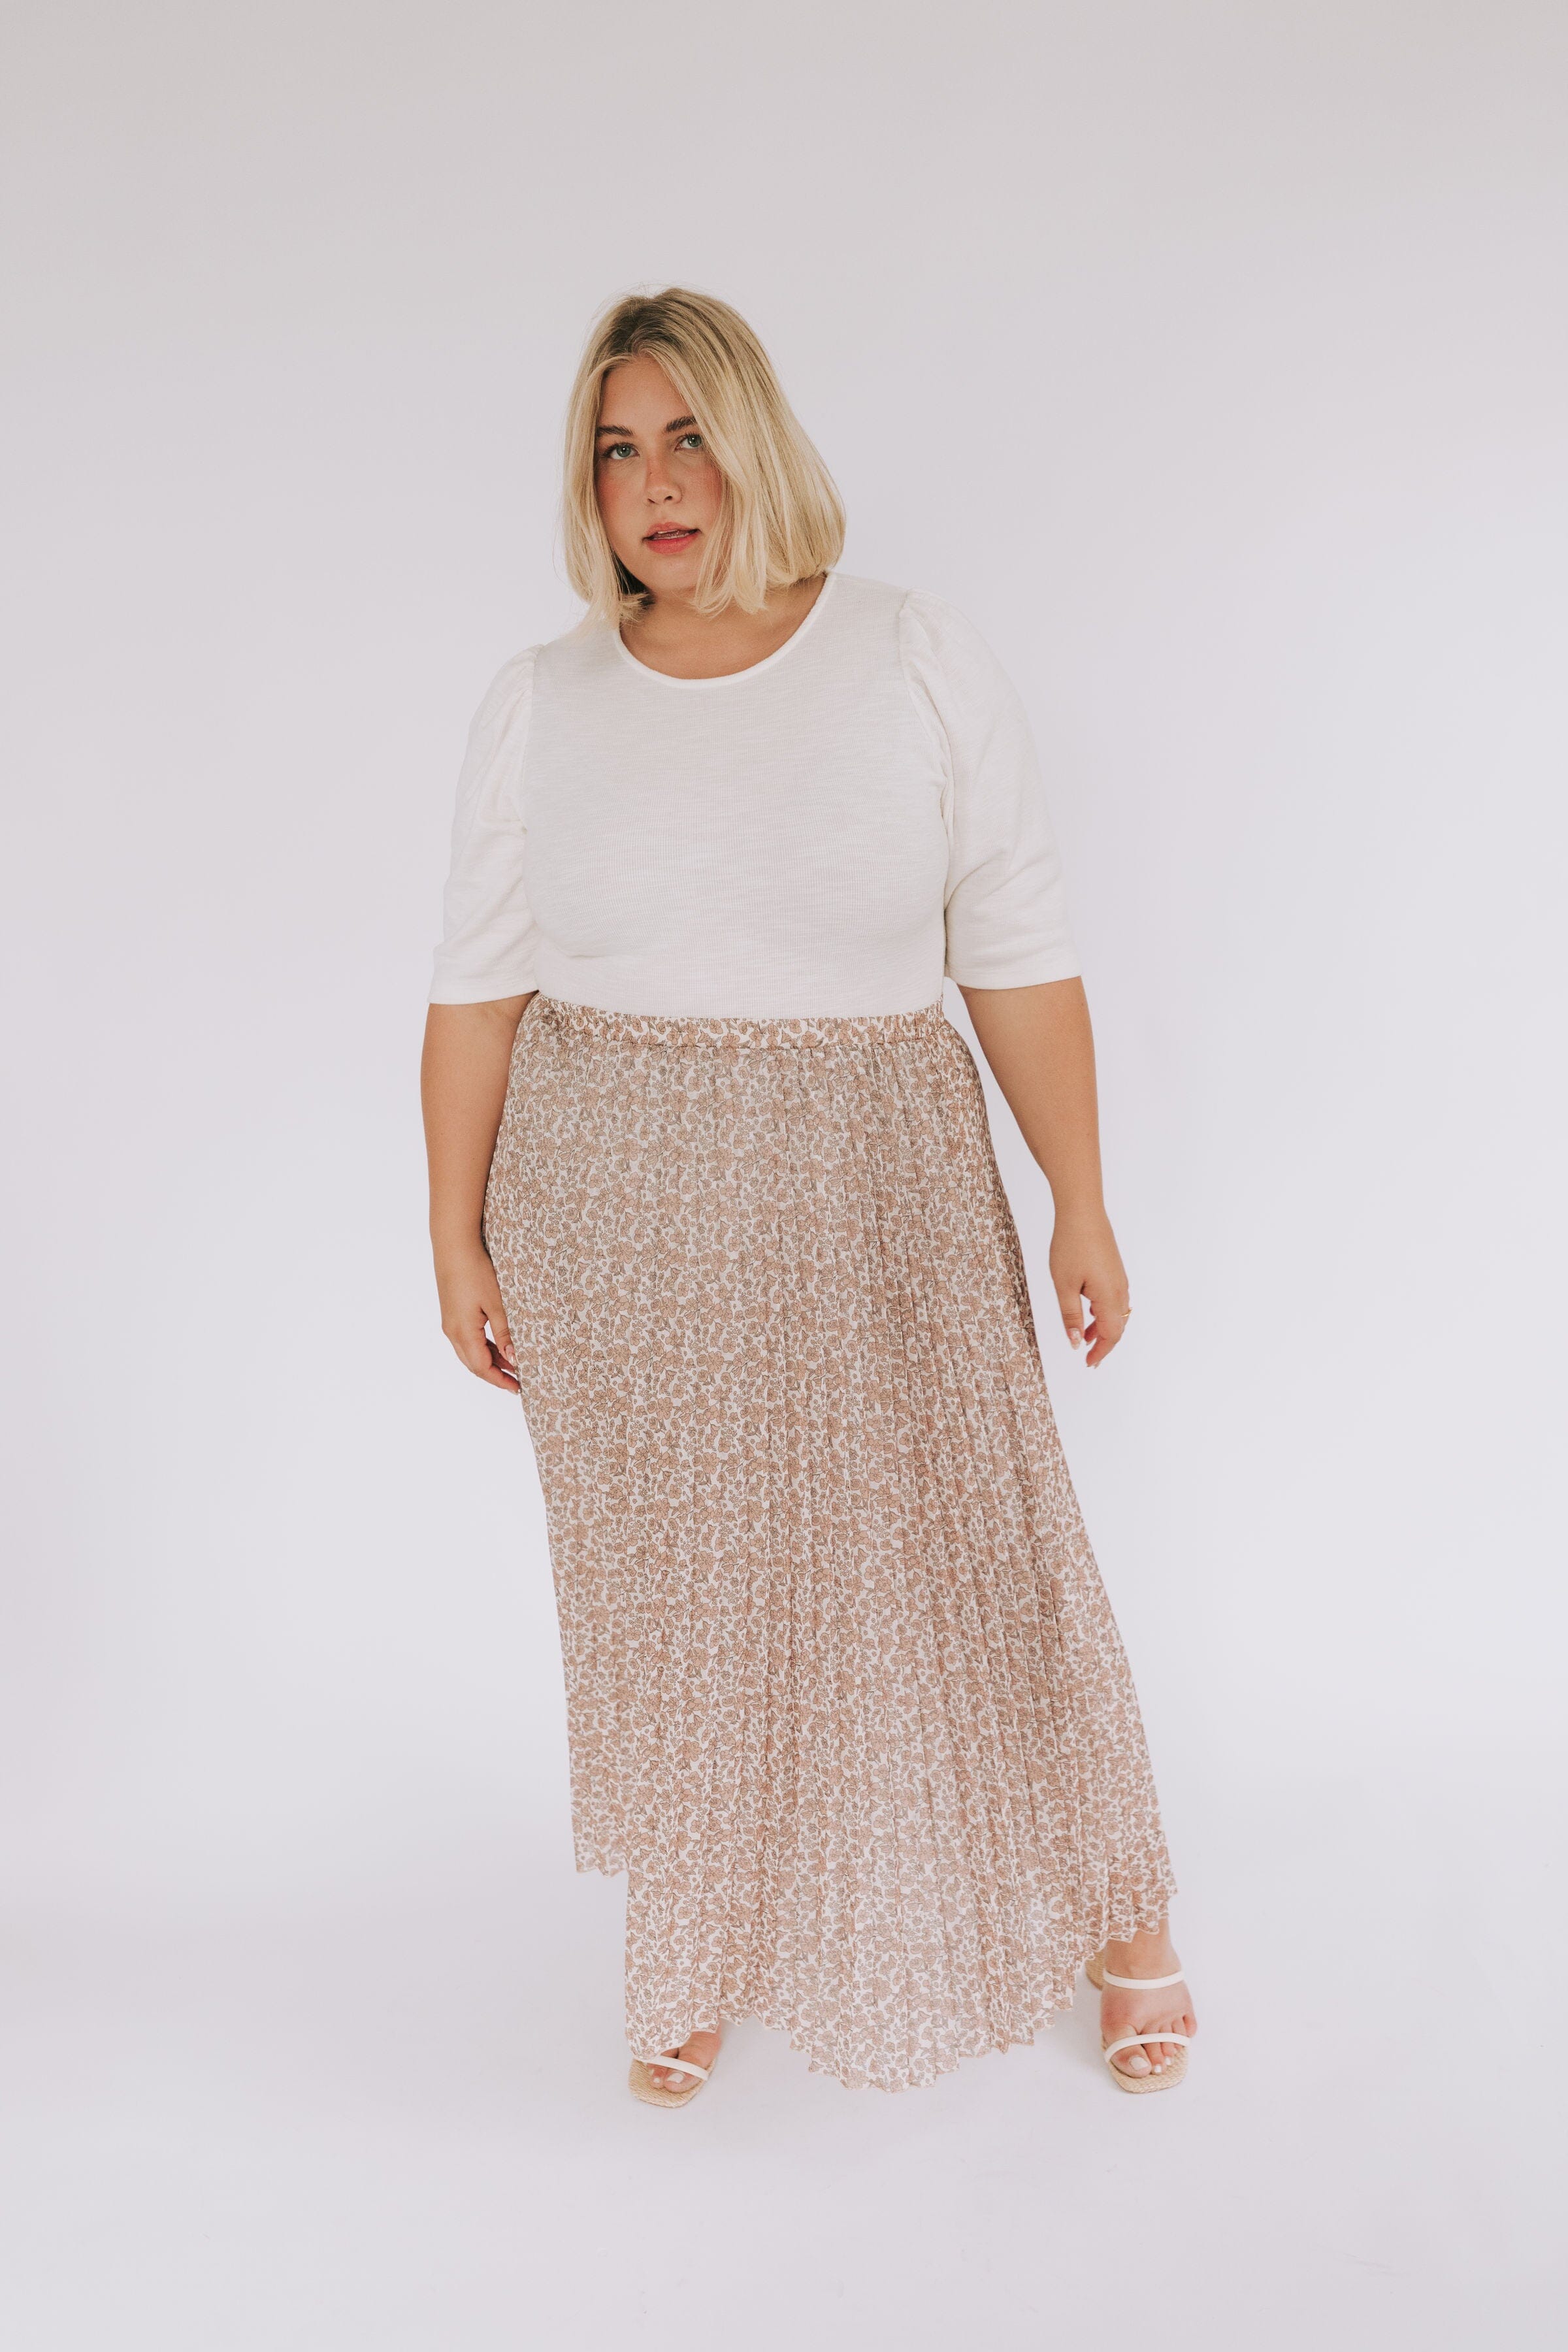 ONE LOVED BABE - Aria Skirt -2 Colors